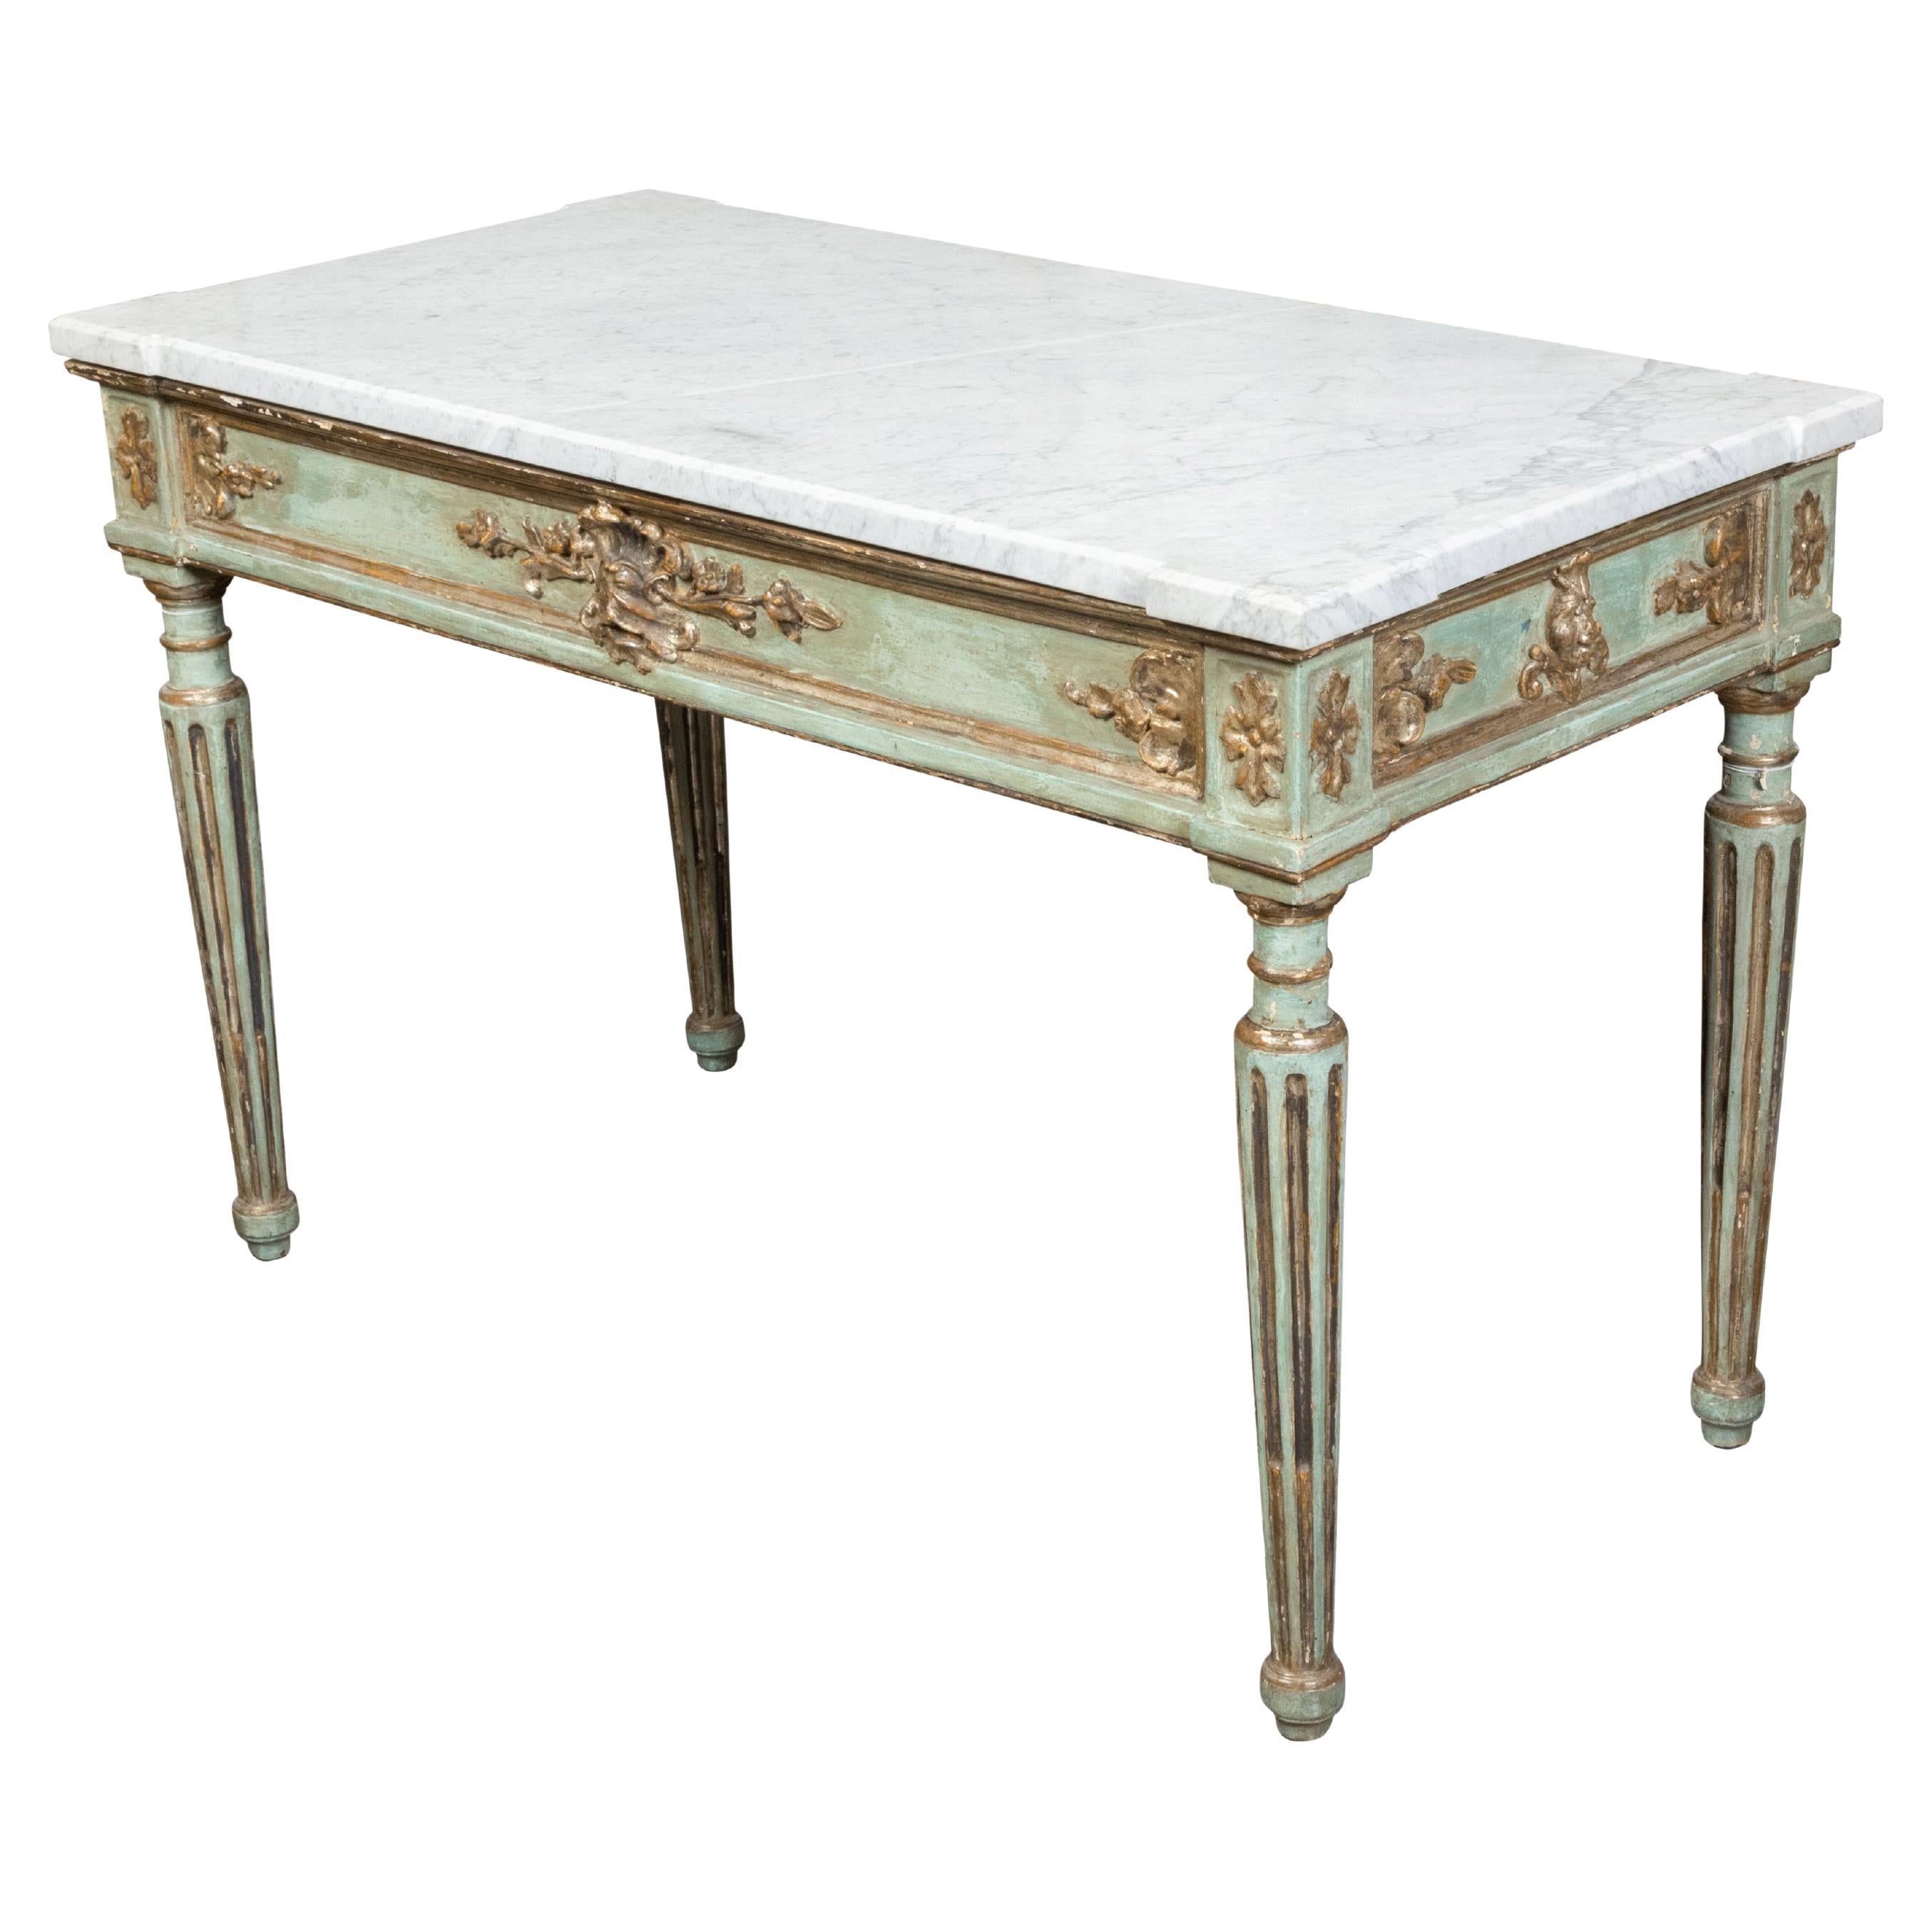 Italian Neoclassical Style 19th Century Green Painted White Marble Top Table For Sale